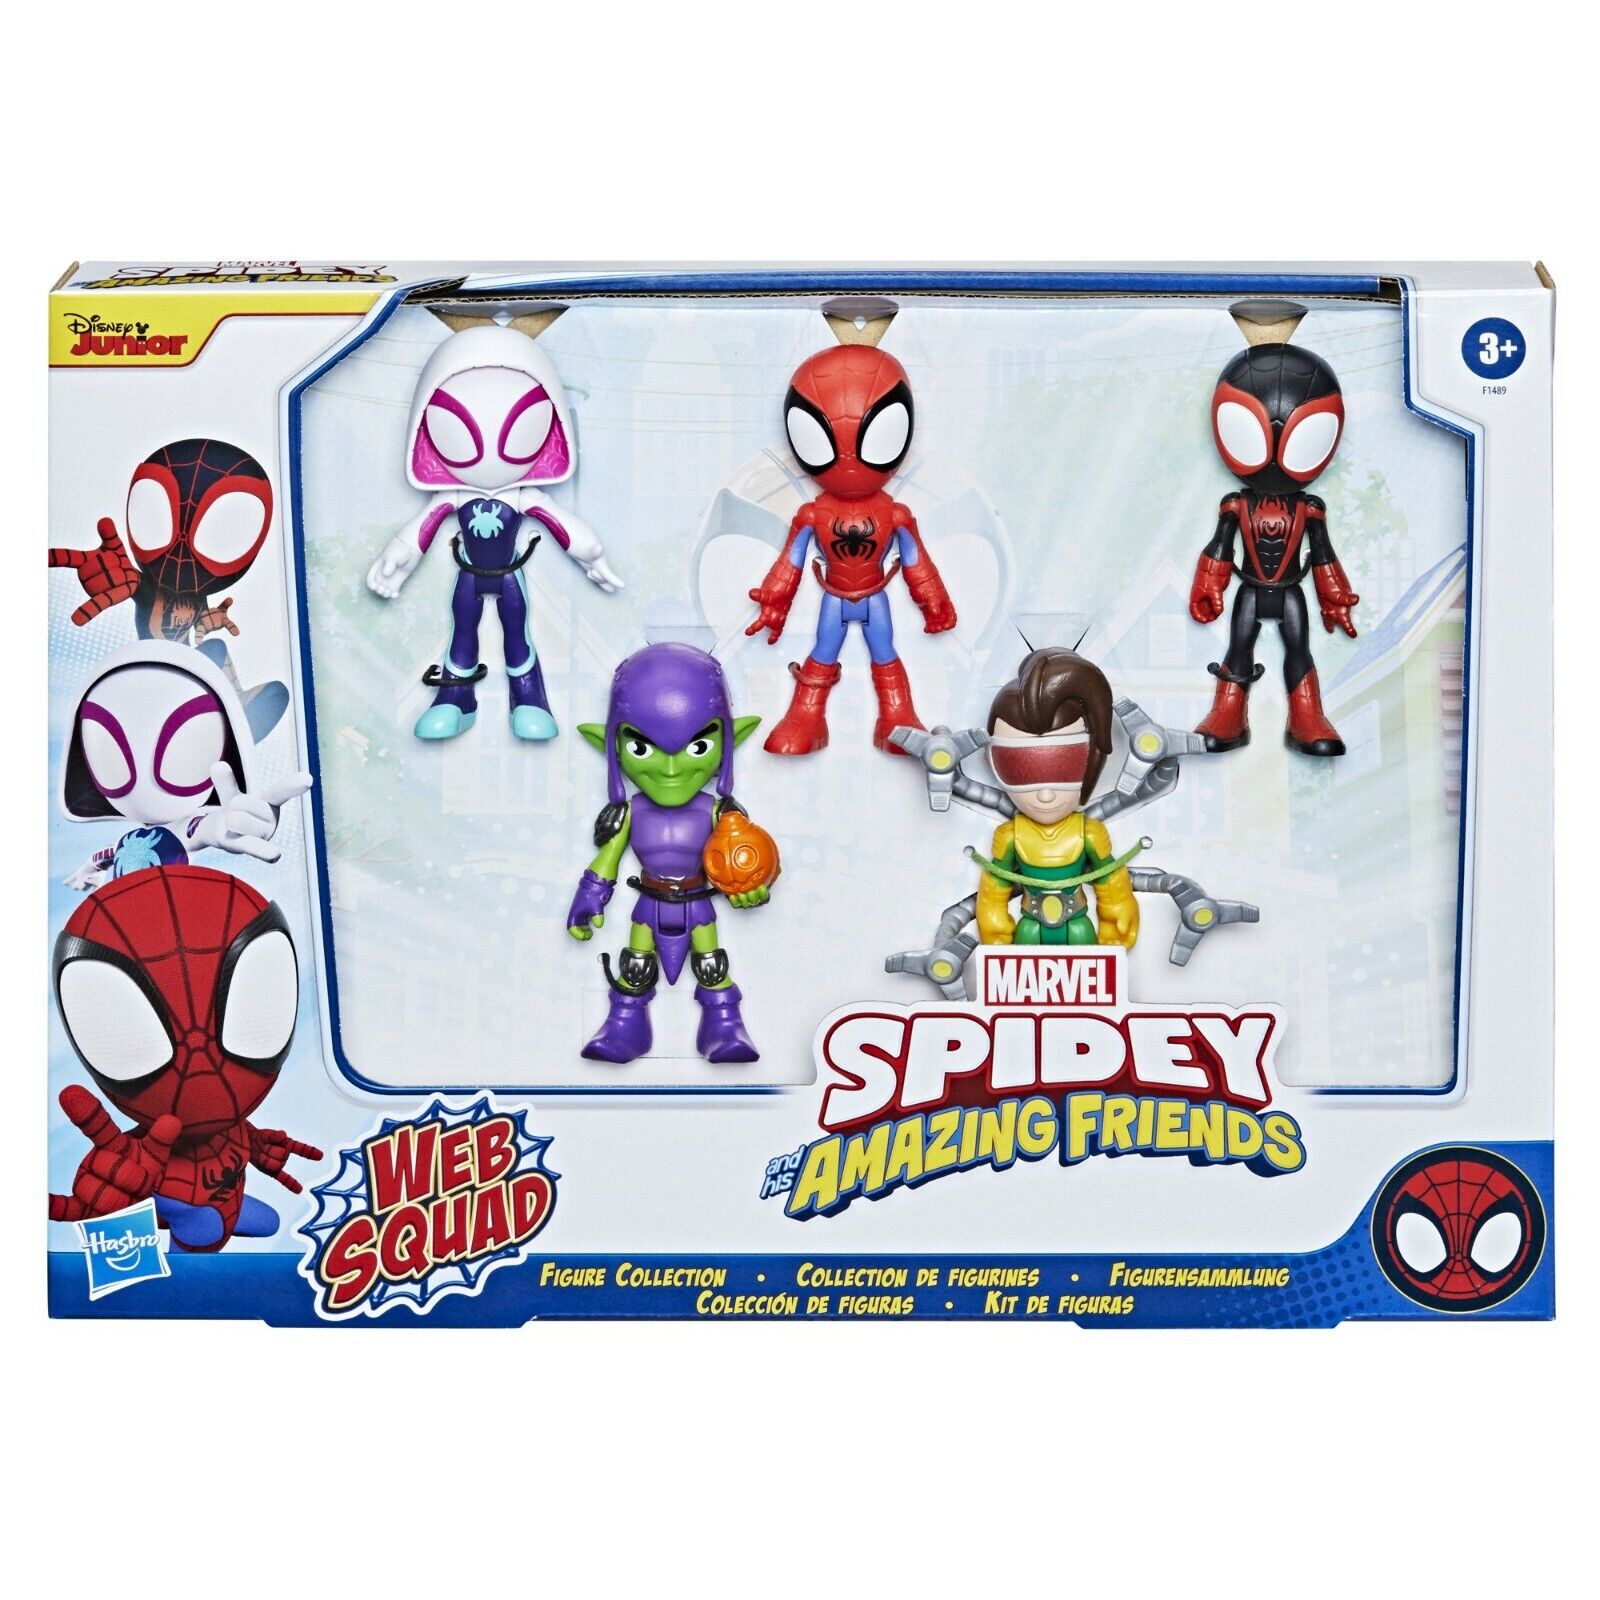 Spidey and His Amazing Friends Web Squad Figure Set